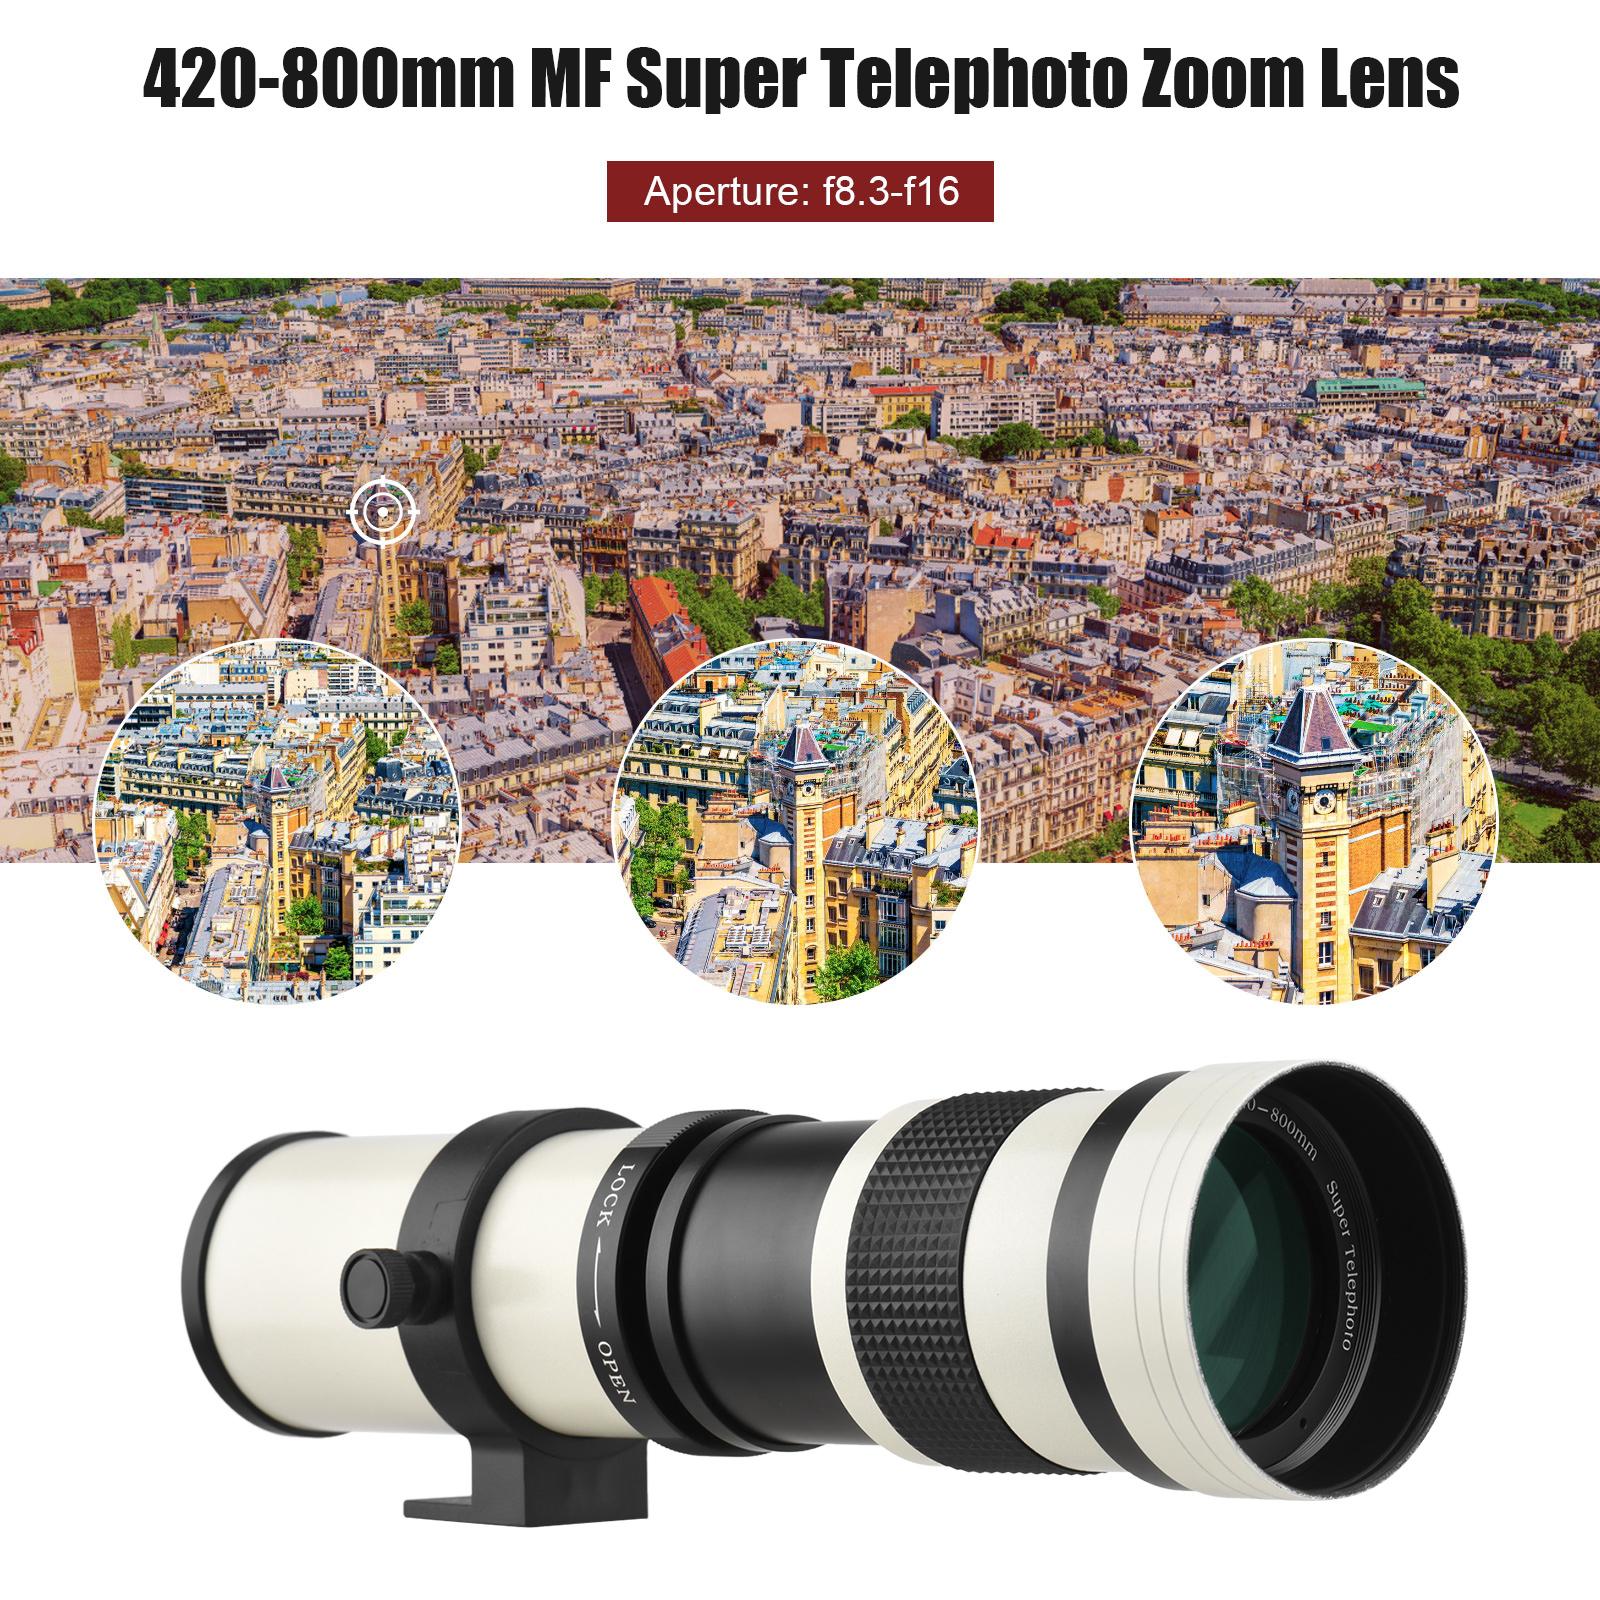 Camera MF Super Telephoto Zoom Lens F/8.3-16 420-800mm T2 Mount with RF-mount Adapter Ring 1/4 Thread Replacement for Canon EOS R/ R3/ R5/ R5C/ R6/ RP RF-Mount Cameras